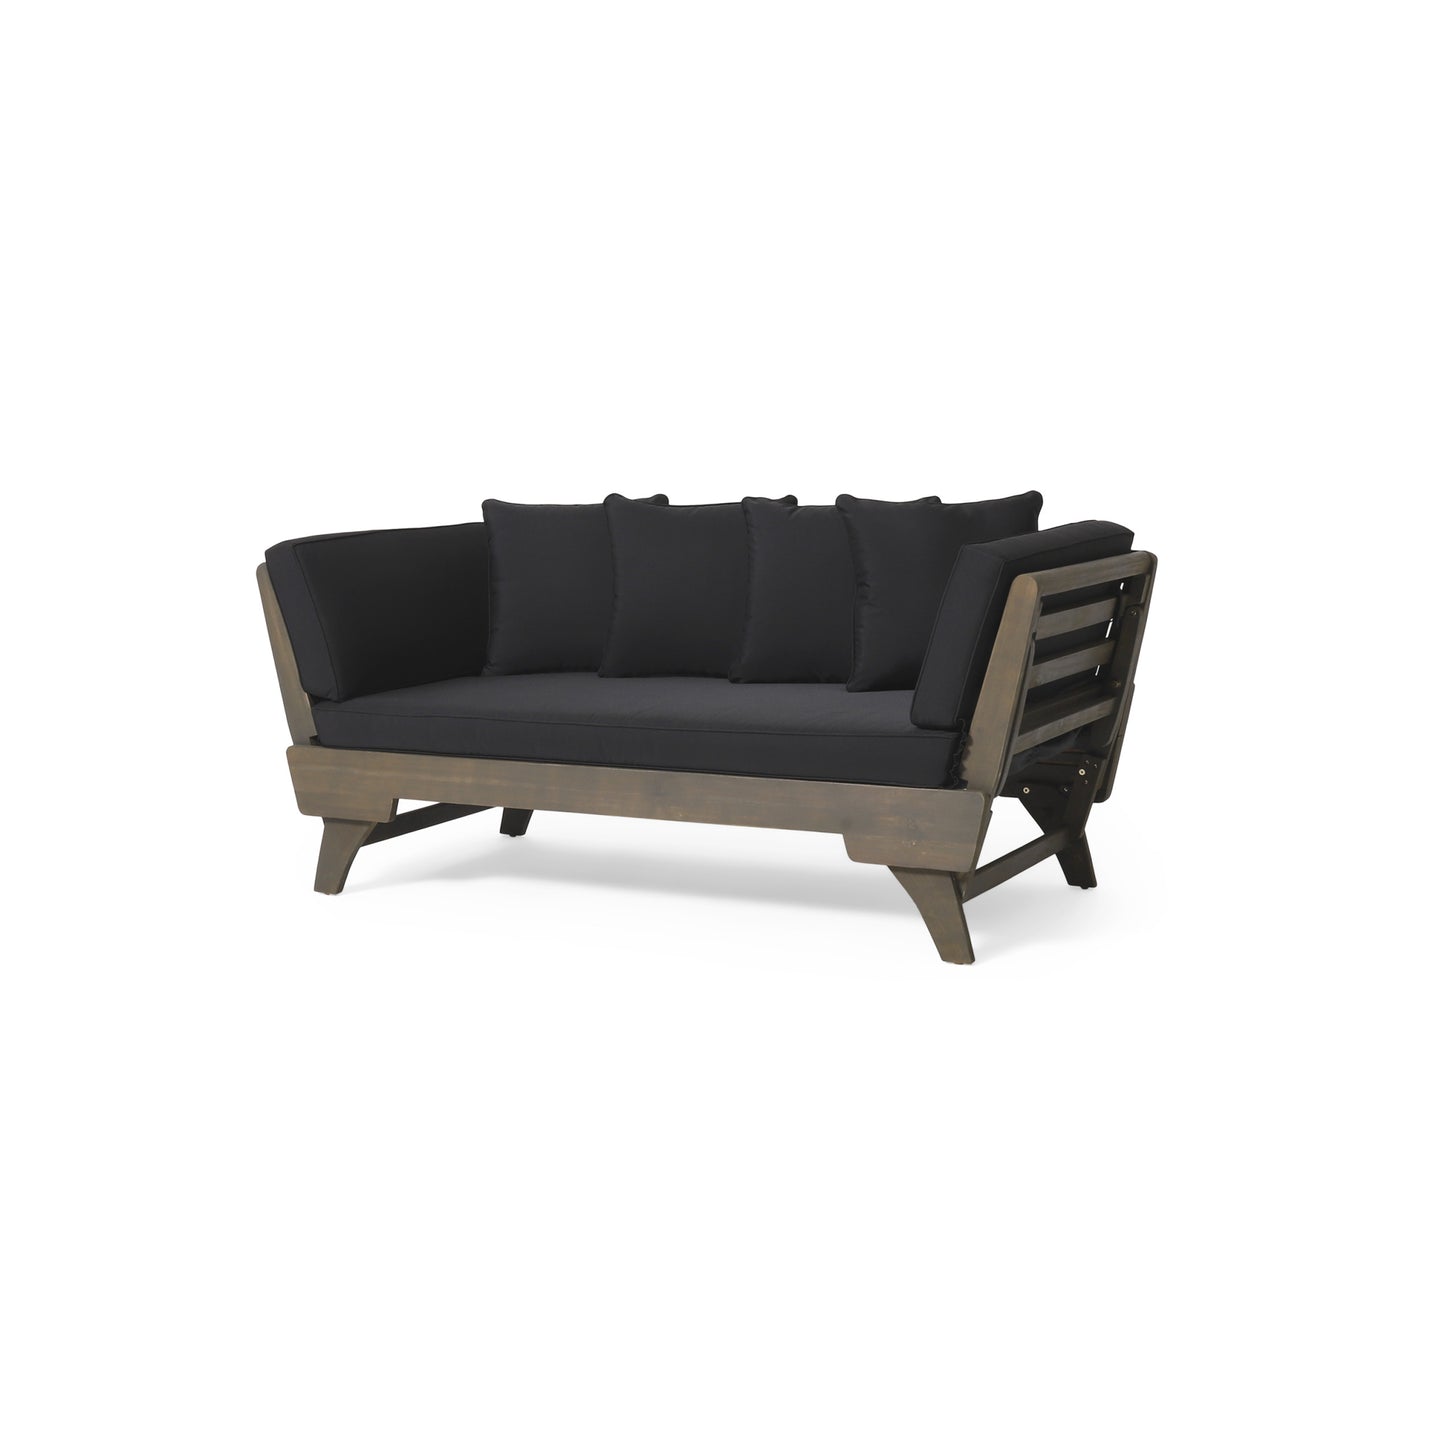 Othello Outdoor Acacia Wood Expandable Daybed with Water Resistant Cushions